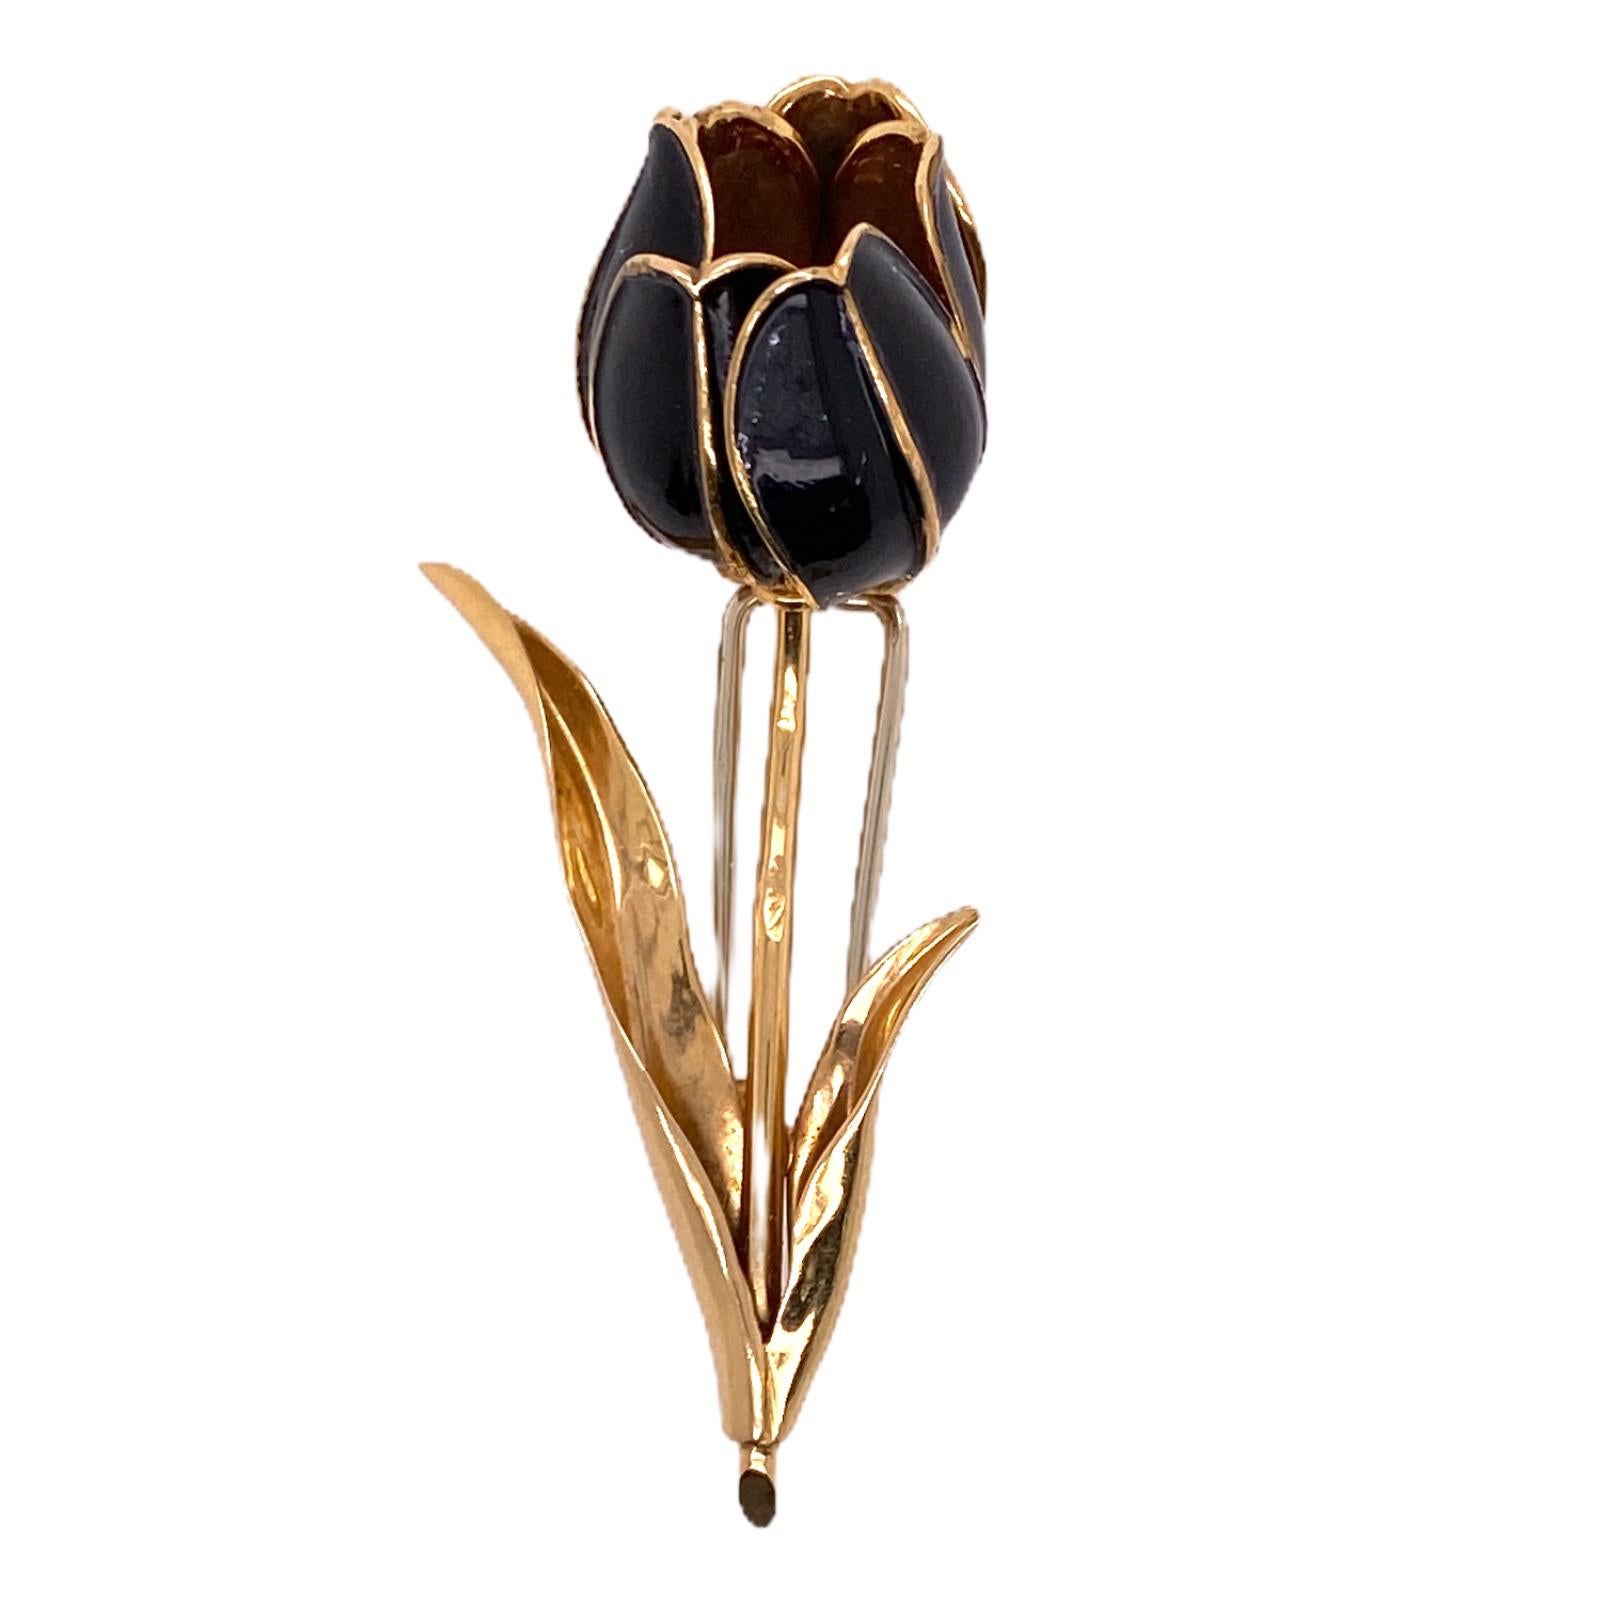 Beautifully handcrafted tulip pin fashioned in 18 karat yellow gold. The French brooch features black enamel petals that open and close, and ruby gemstones inside. The flower measures 2.25 inches in length, 1.0 inch in width, and is hallmarked and